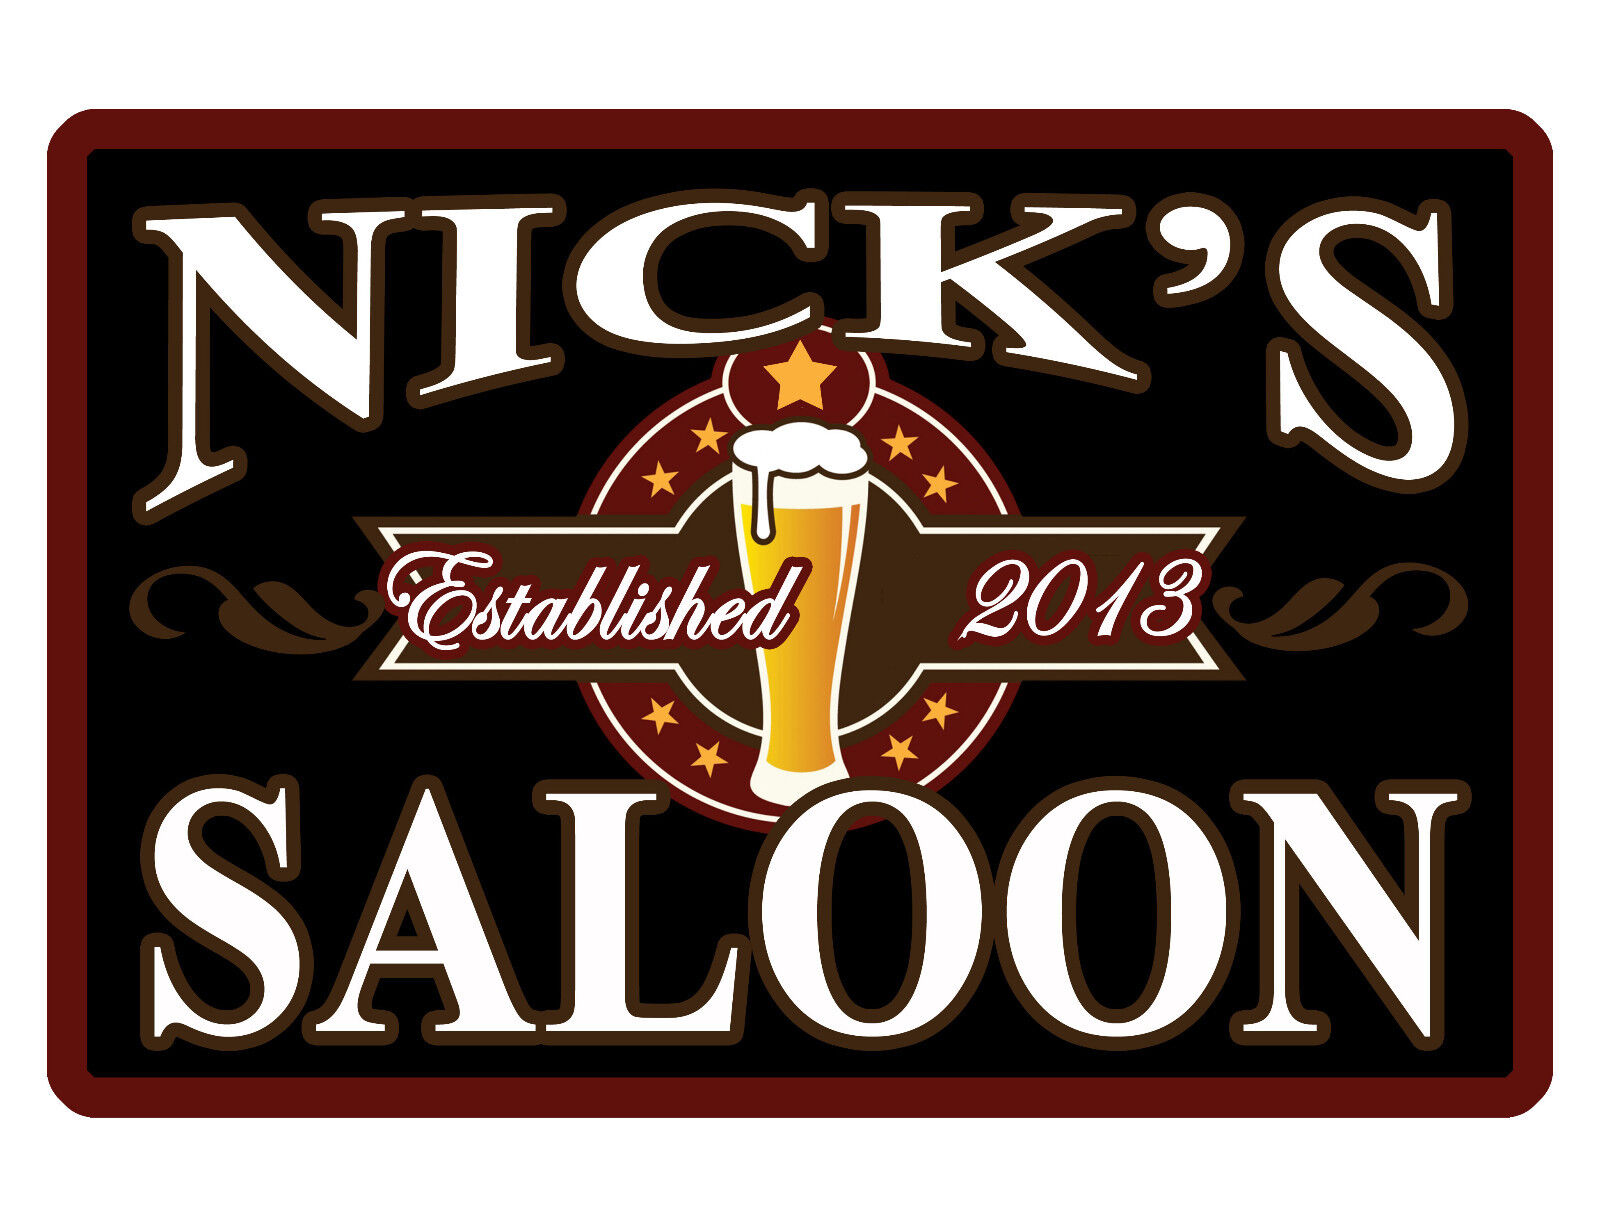 PERSONALIZED METAL SIGN YOUR NAME SALOON CUSTOM SIGN DURABLE FULL COLOR BAR1 103